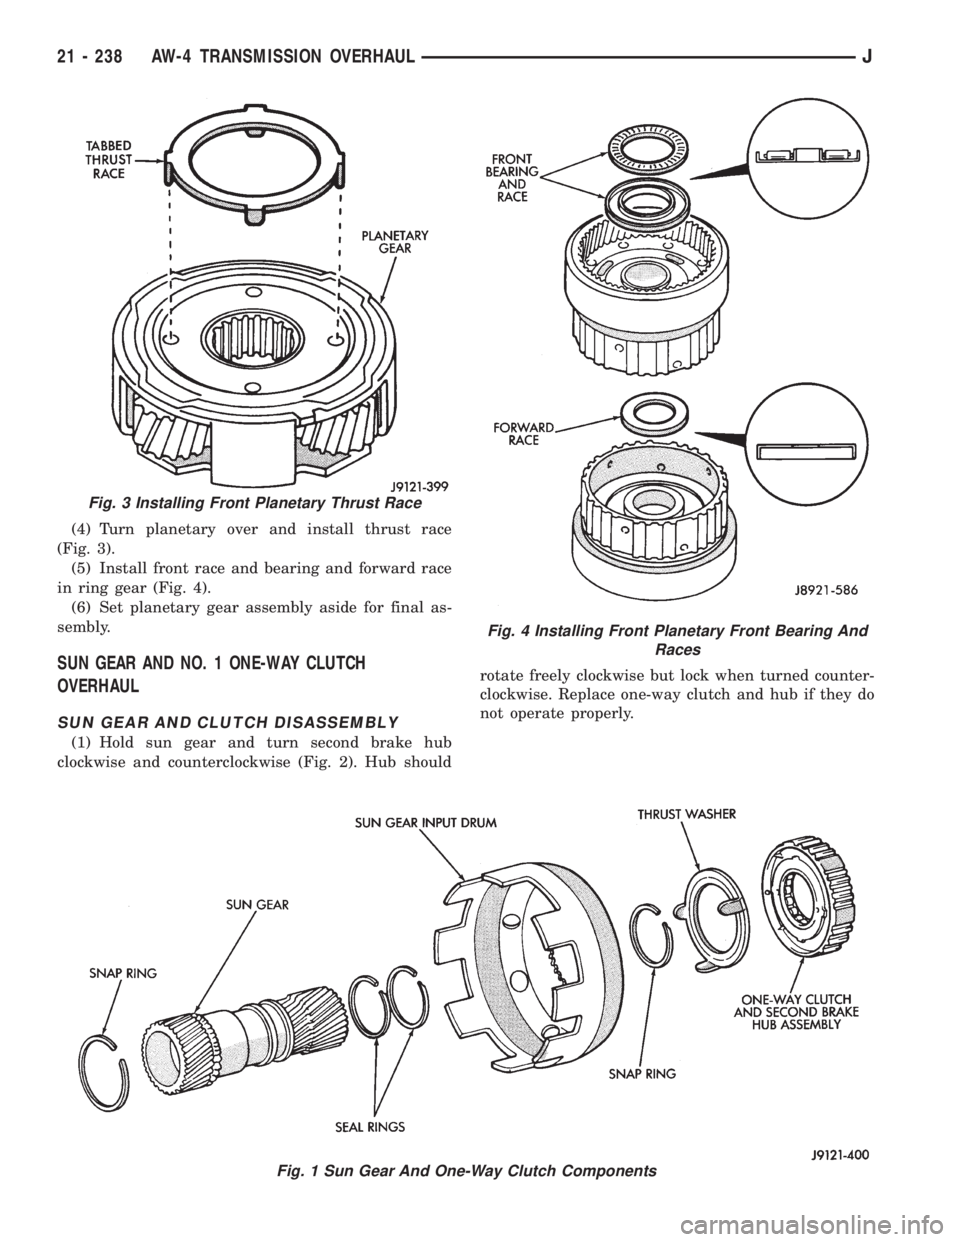 JEEP CHEROKEE 1995  Service Repair Manual (4) Turn planetary over and install thrust race
(Fig. 3).
(5) Install front race and bearing and forward race
in ring gear (Fig. 4).
(6) Set planetary gear assembly aside for final as-
sembly.
SUN GEA